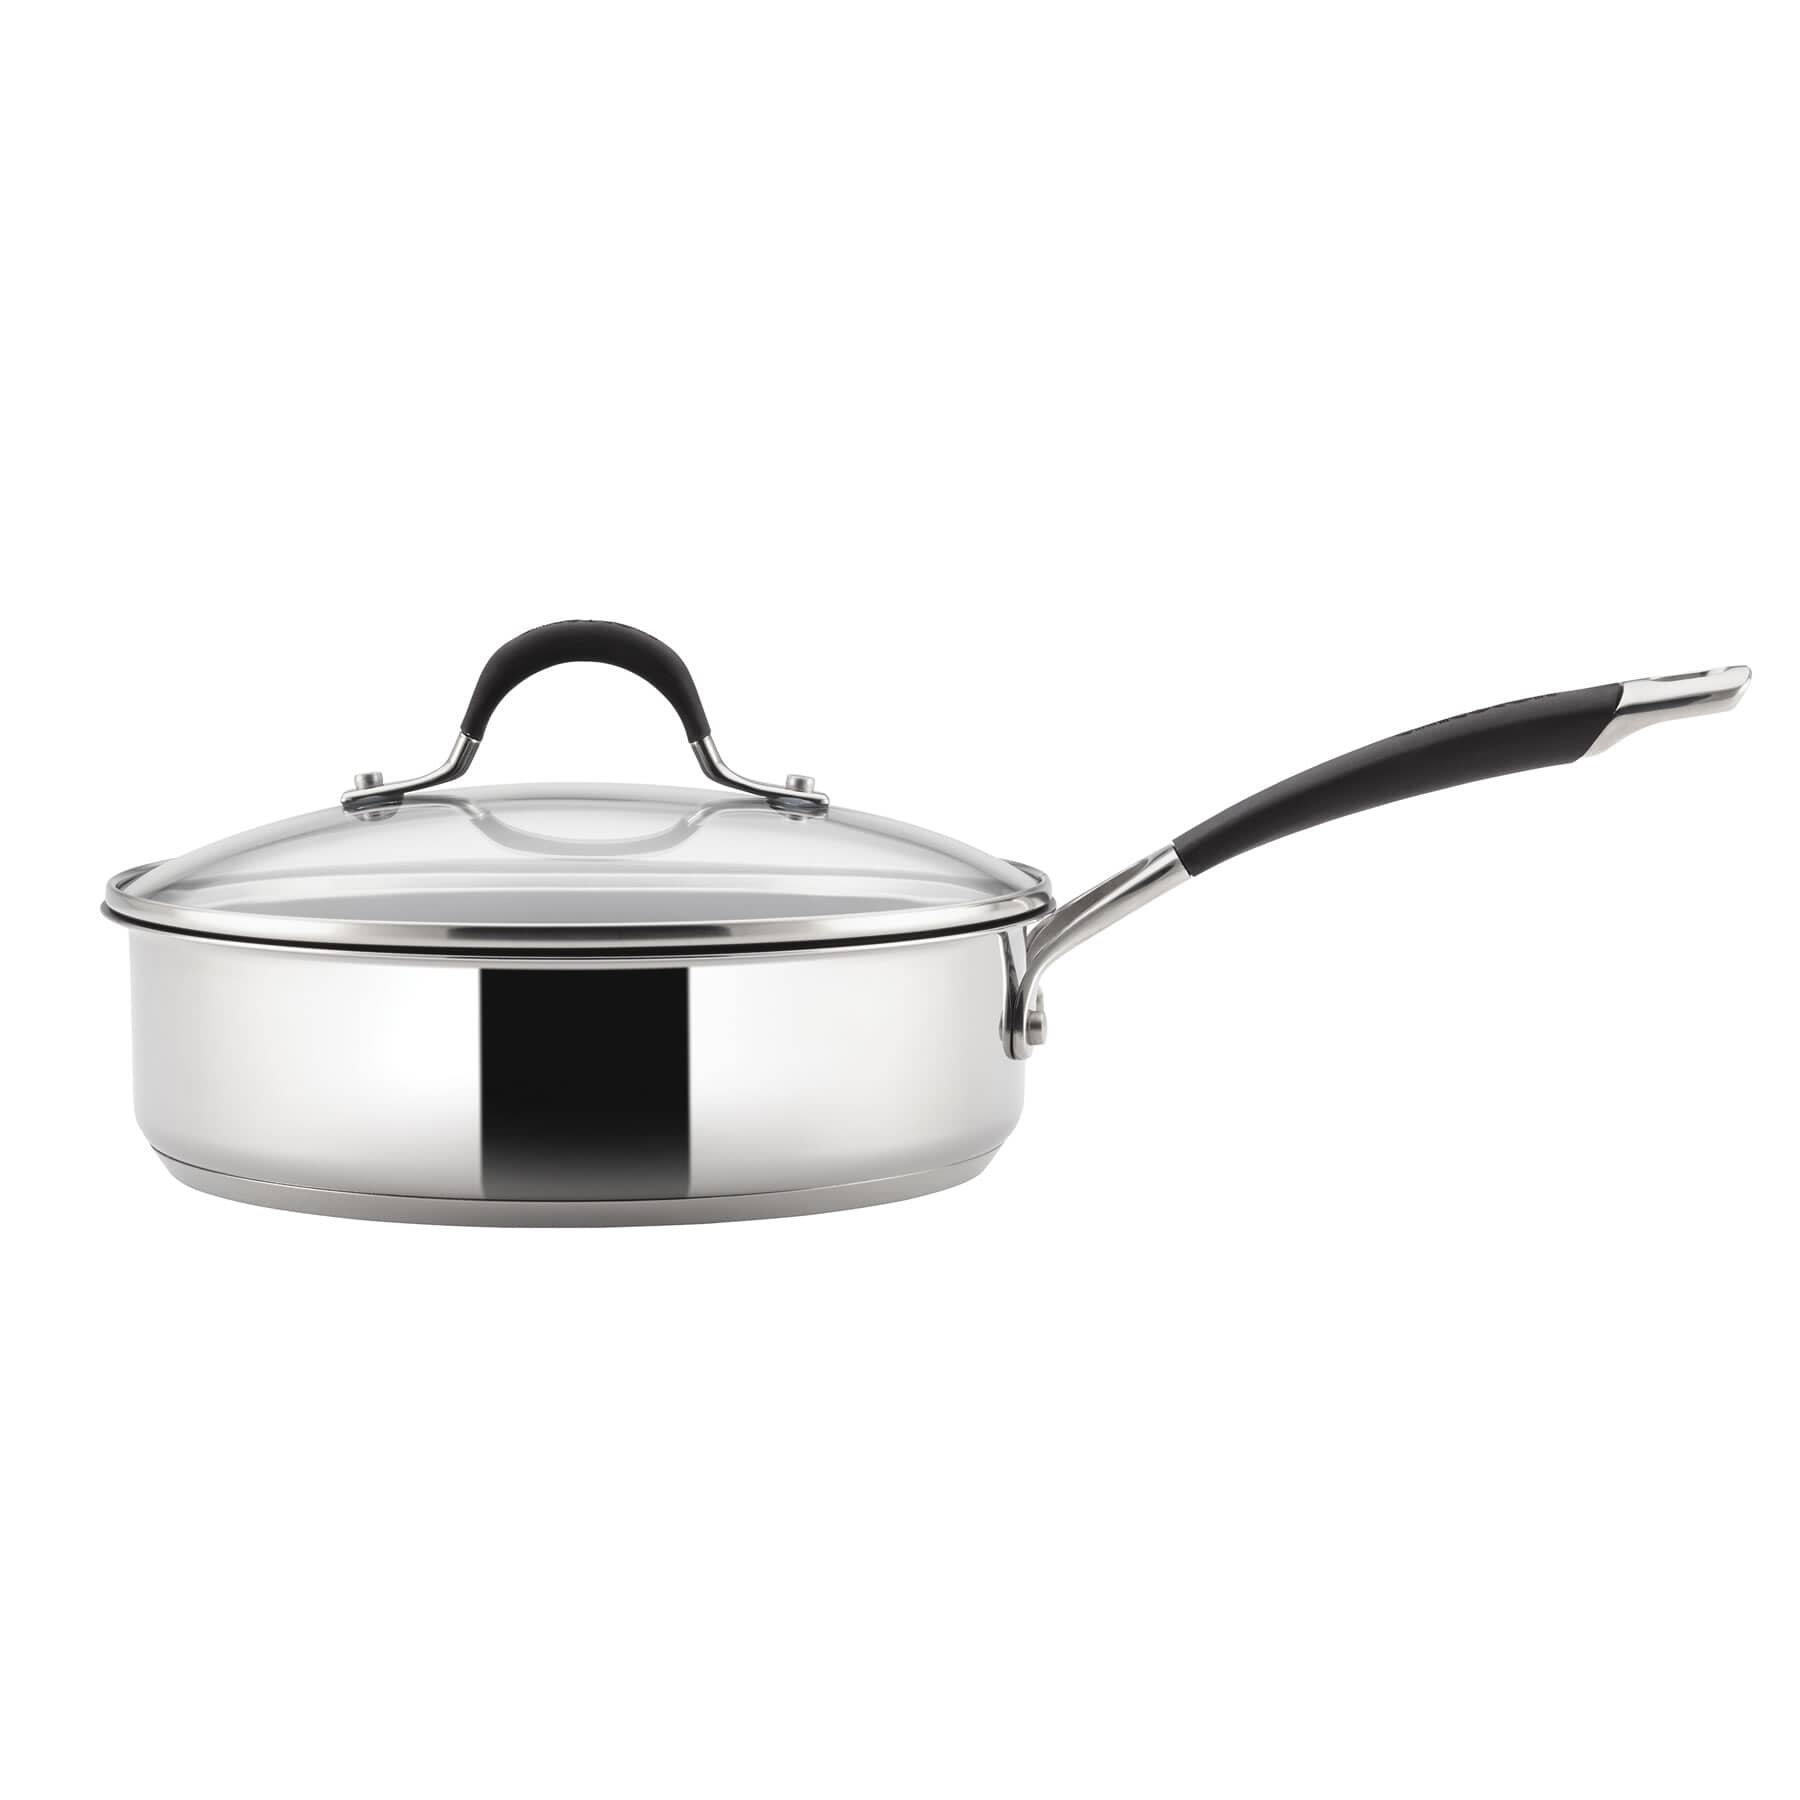 Circulon Momentum Covered Saute Pan 24 cm 2.8 Litre Stainless Steel 